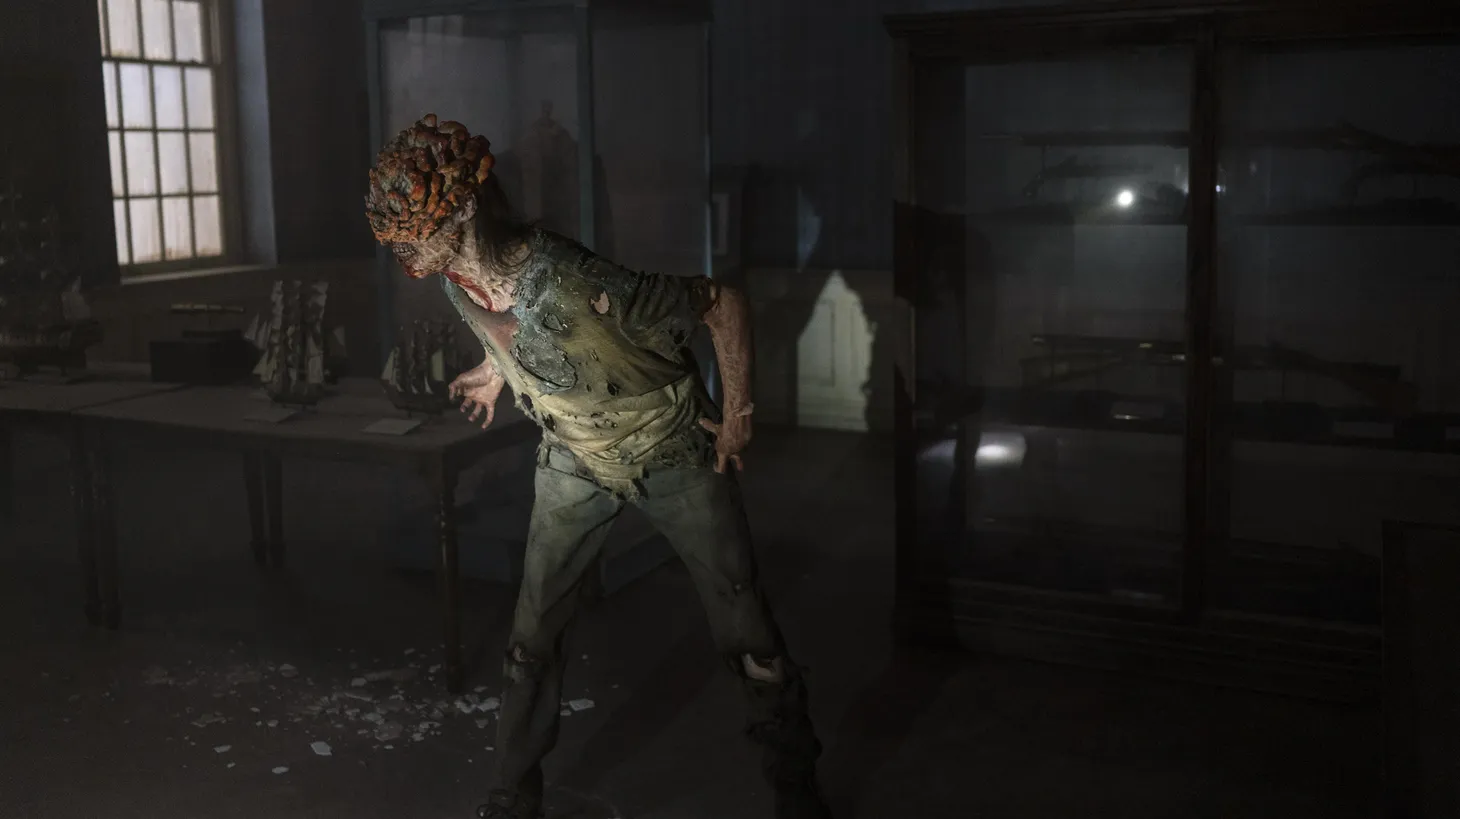 More fungus than human, clickers bloom mushrooms from their skull in "The Last of Us."